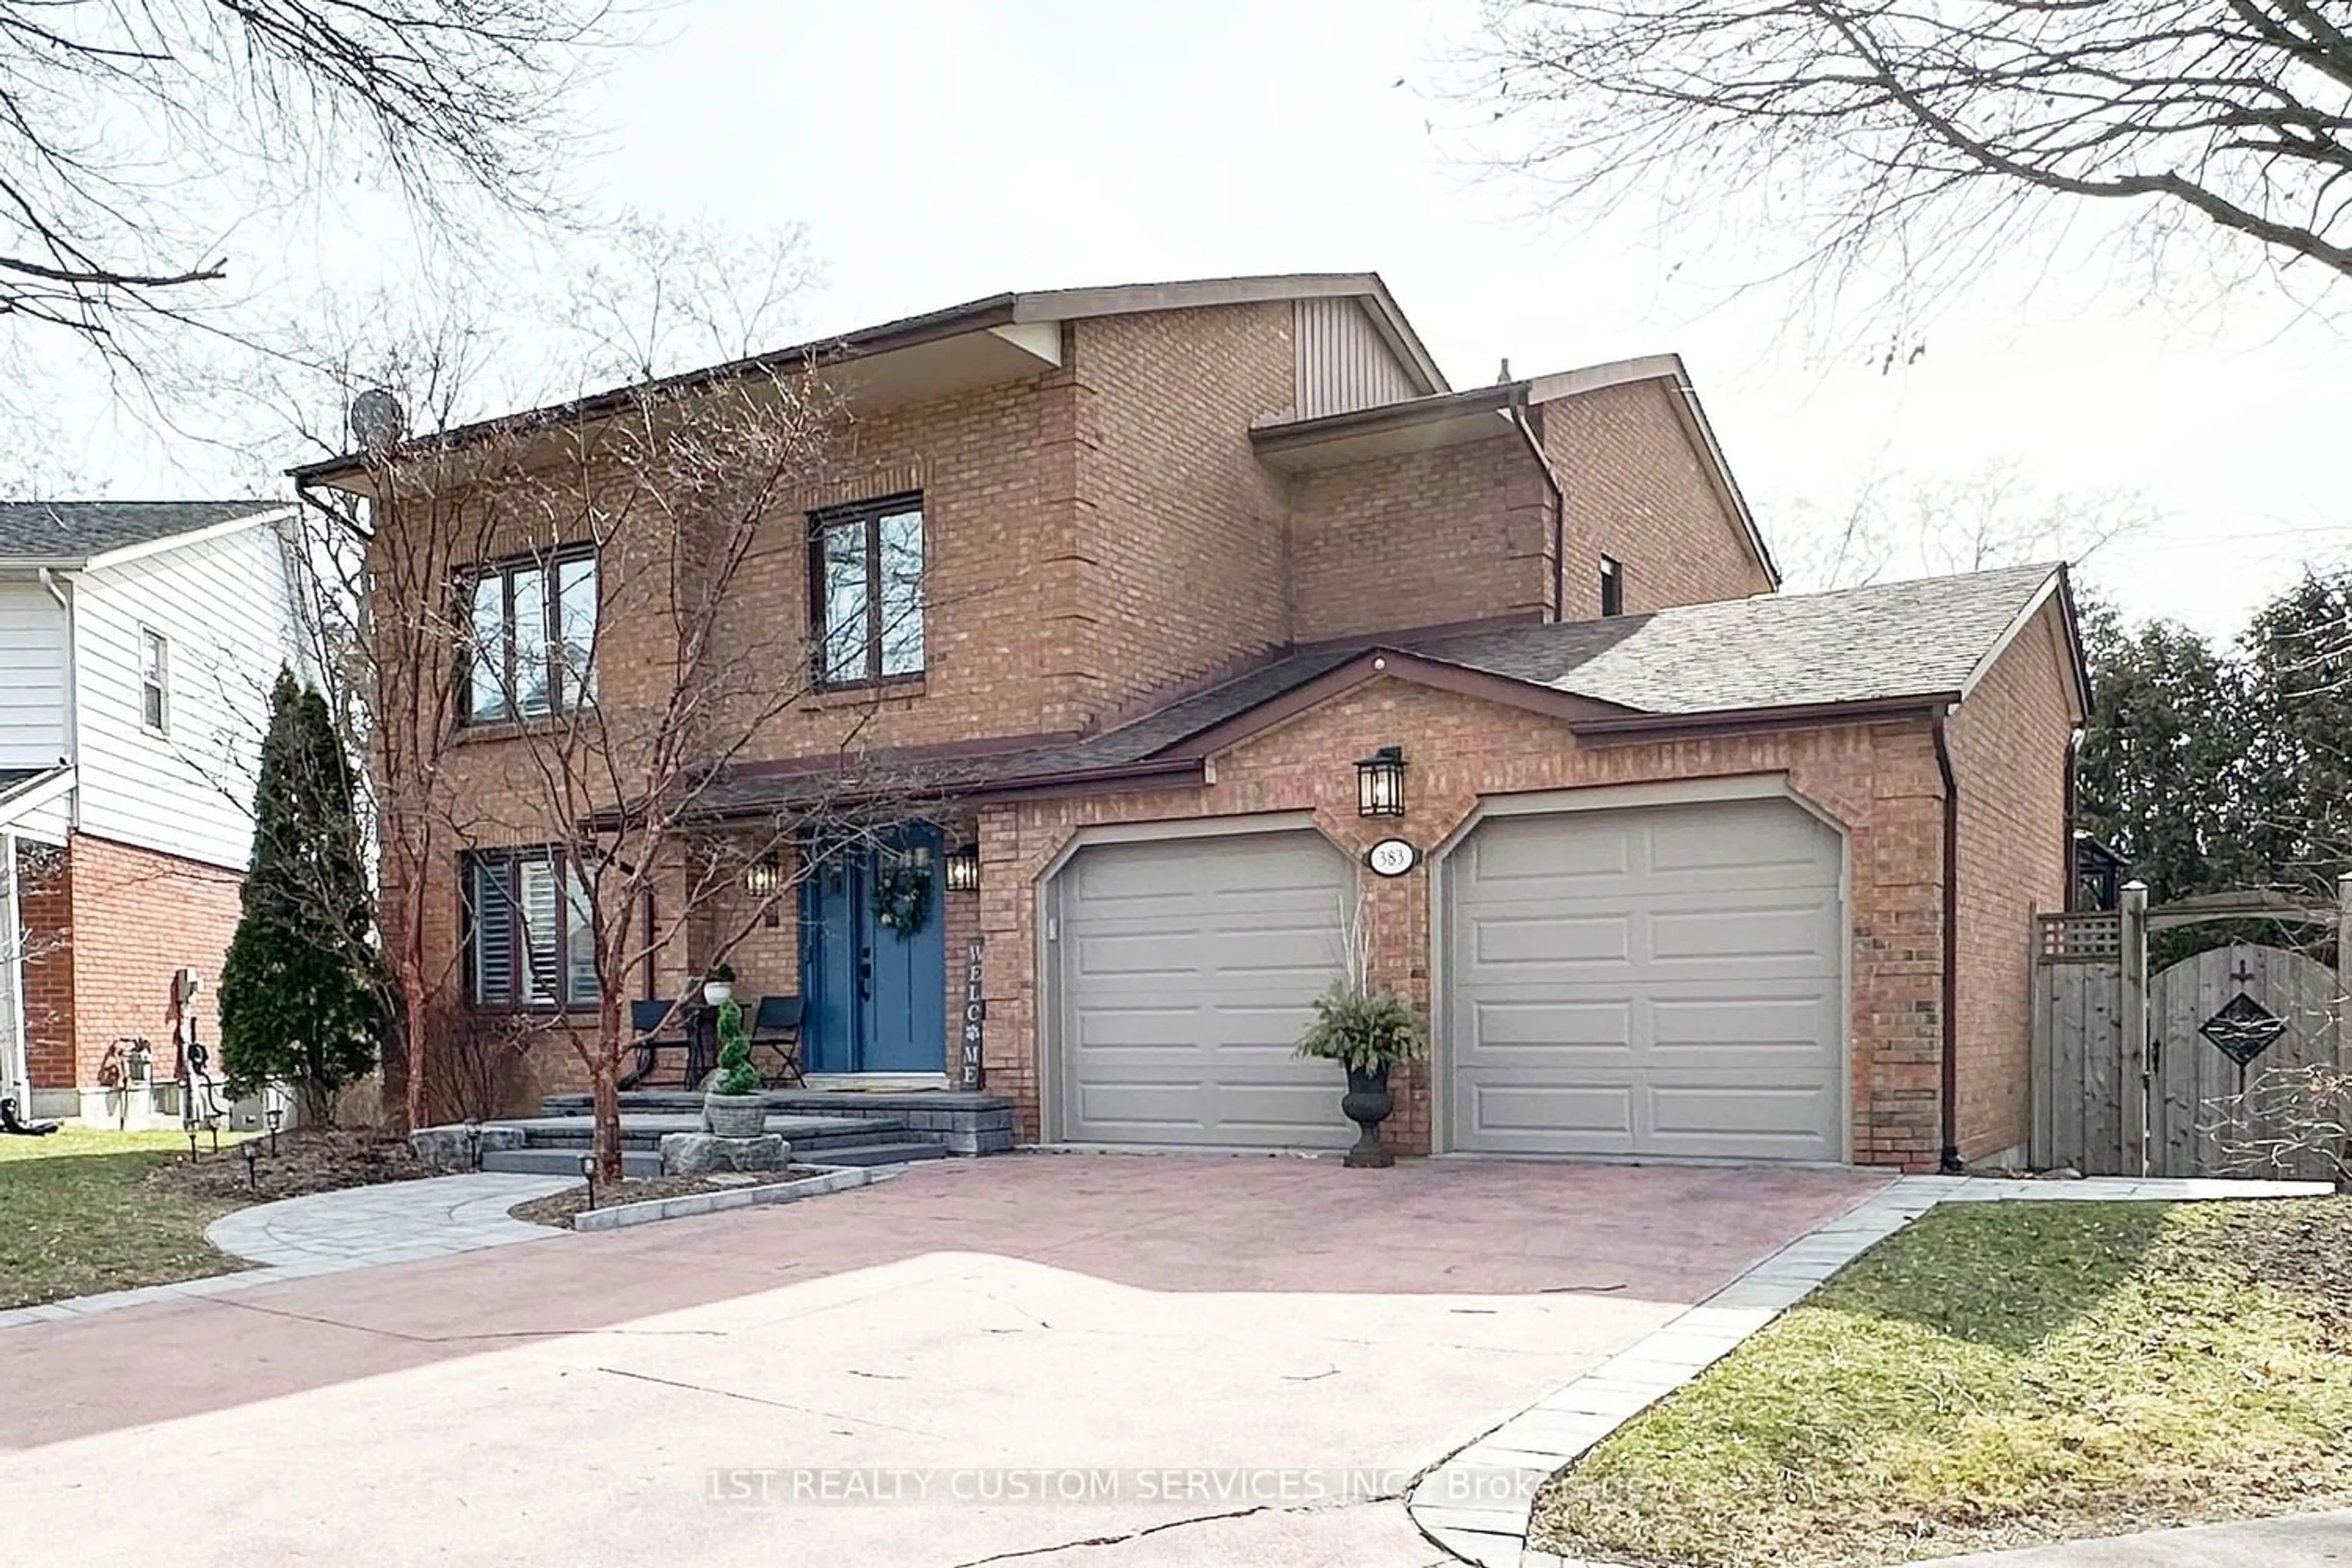 Home with brick exterior material for 383 Ellesmere Crt, Oshawa Ontario L1H 8E6